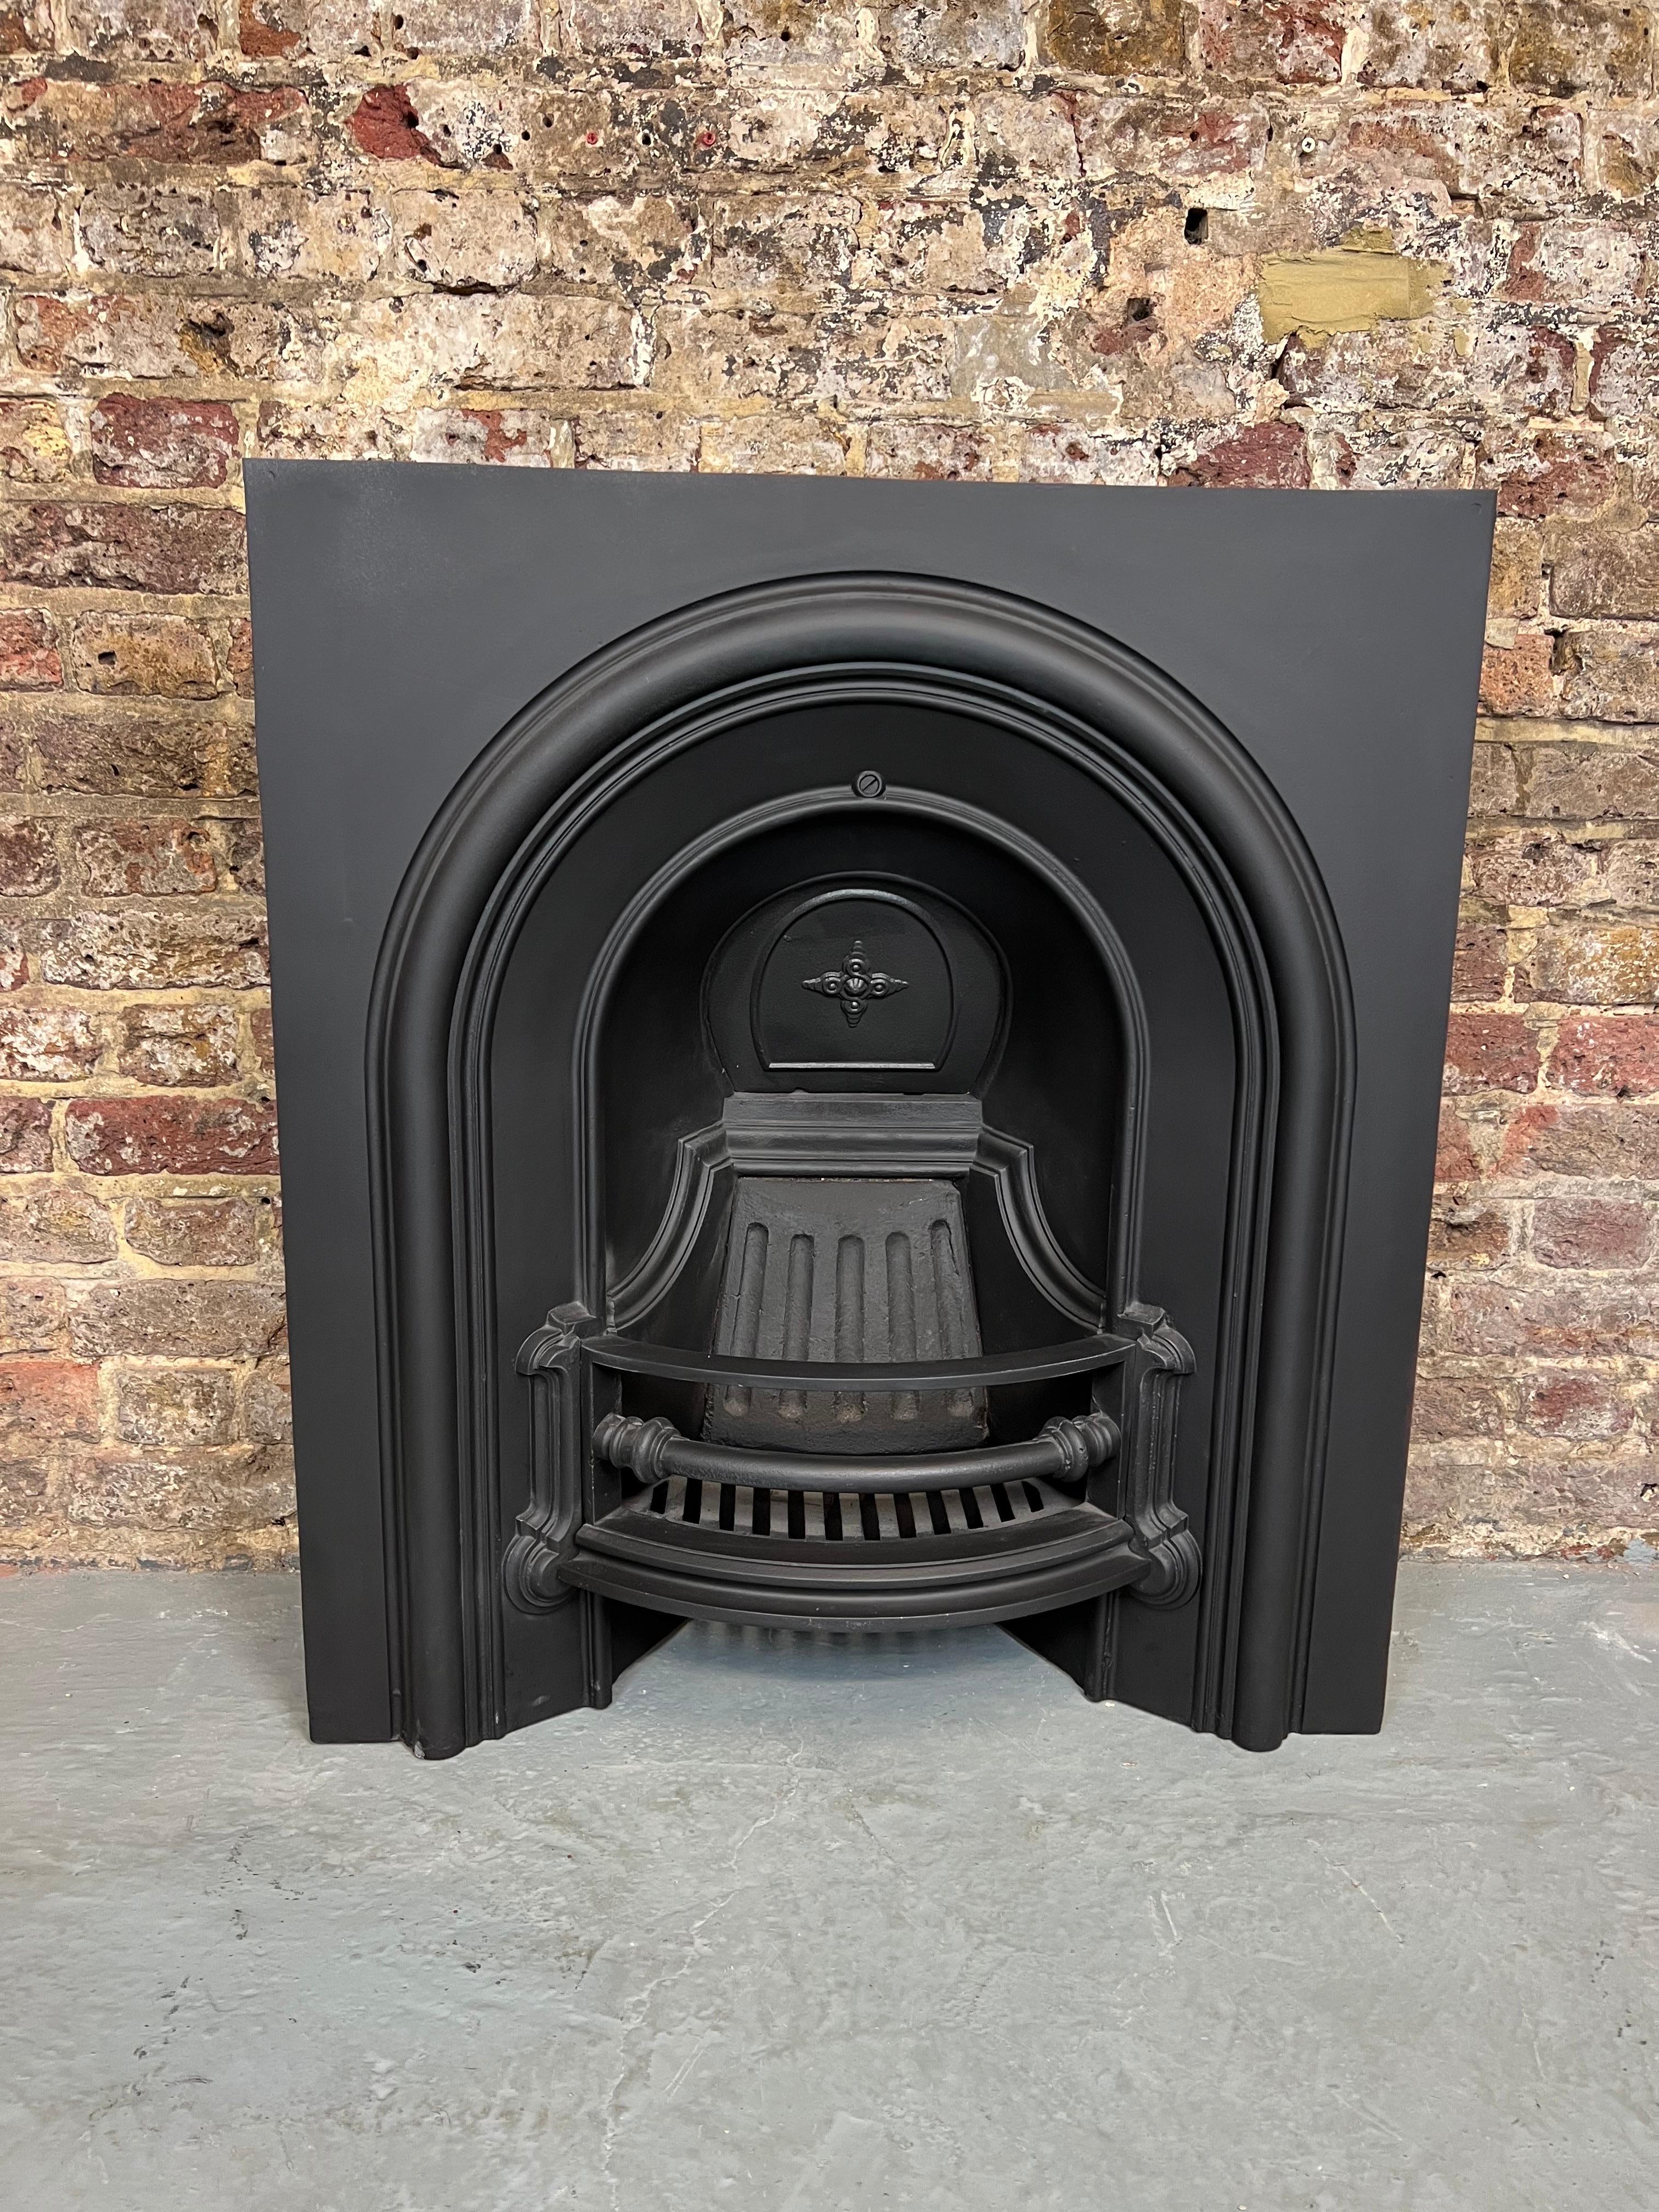 19th Century Cast Iron Fireplace Insert
English Made Circa 1880 From The Victorian Period.
This Classic Arched Fireplace Insert Is Complete With Back & Front Bars.
In Traditional Blackened Finish. Recently Salvaged From A Period London Victorian